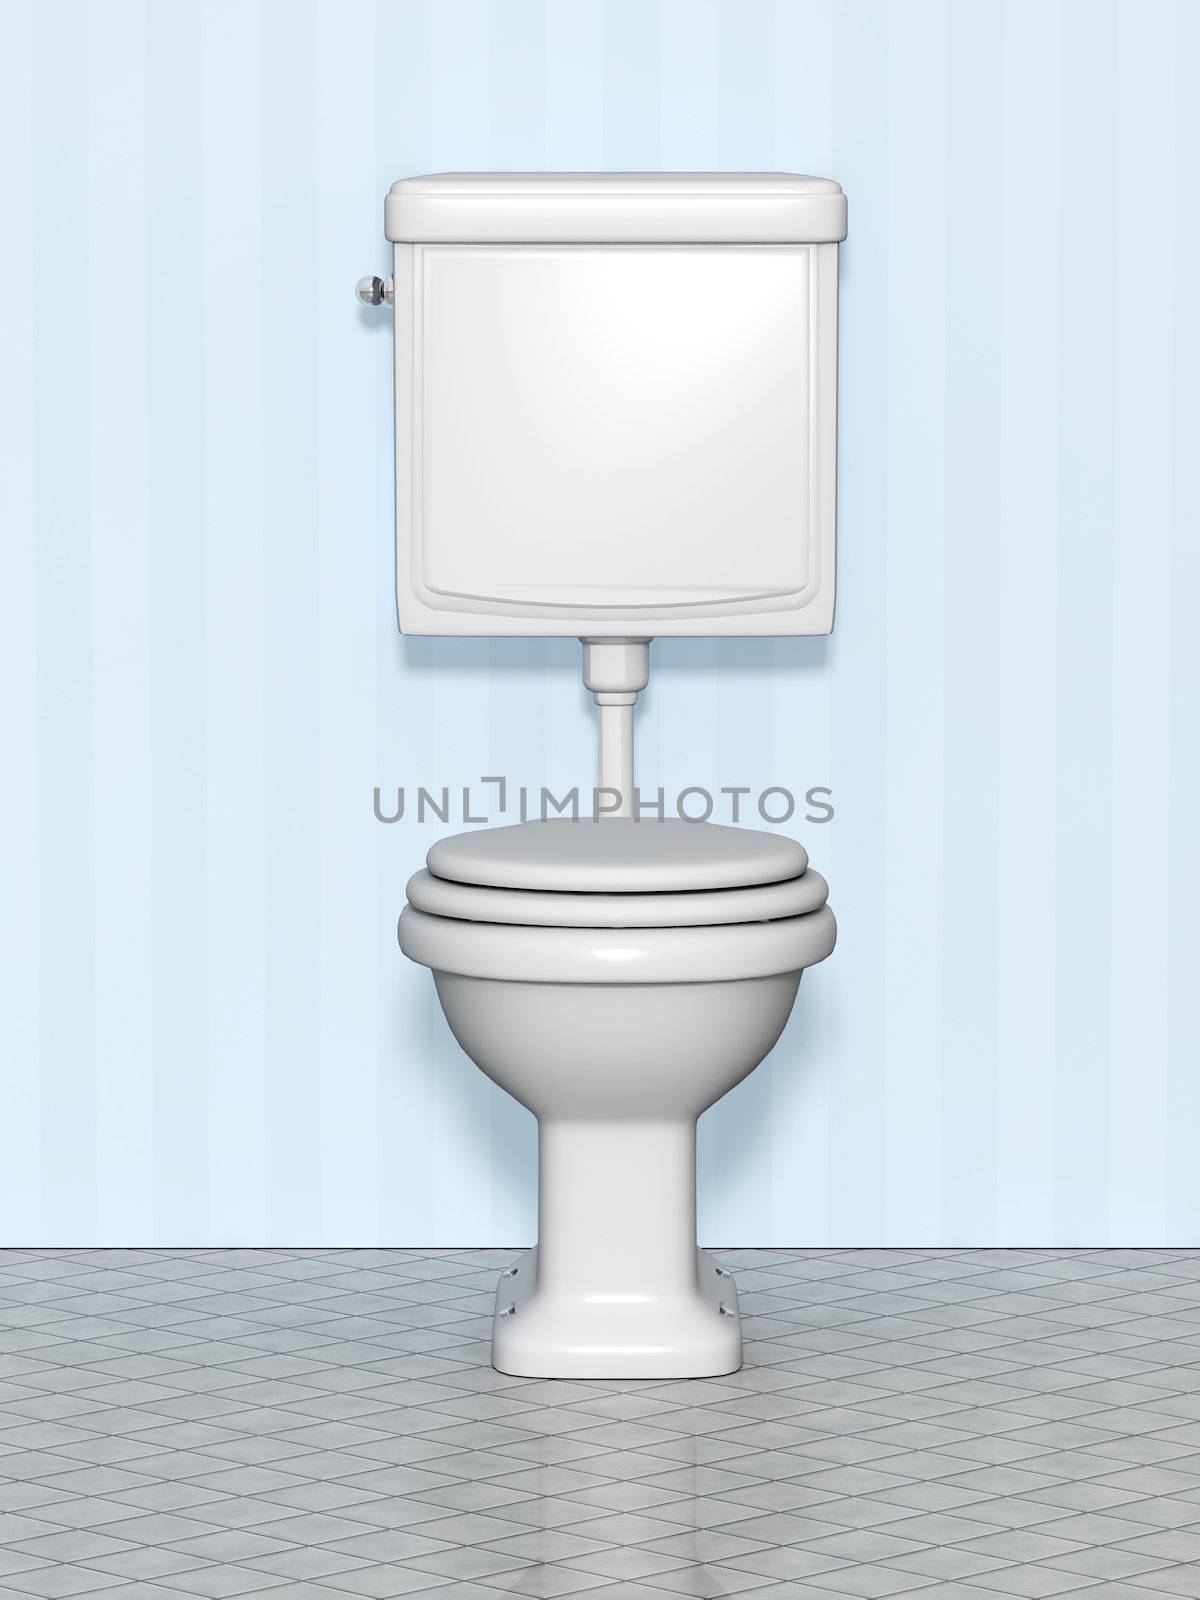 An image of a white standard wc